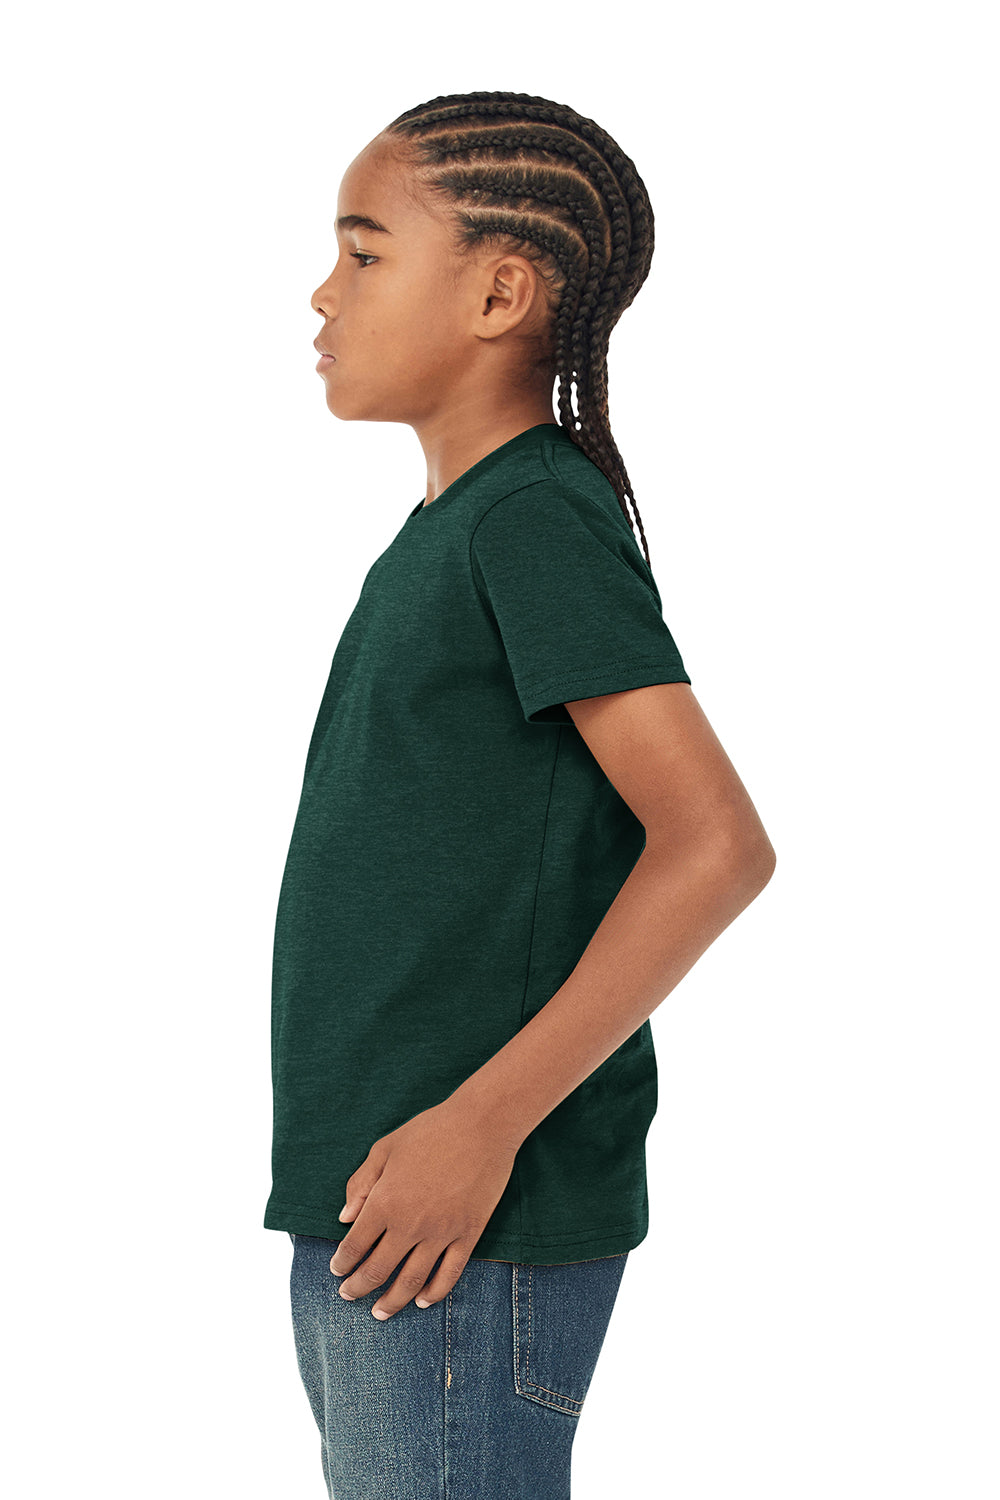 Bella + Canvas 3001Y Youth Jersey Short Sleeve Crewneck T-Shirt Heather Forest Green Model Side